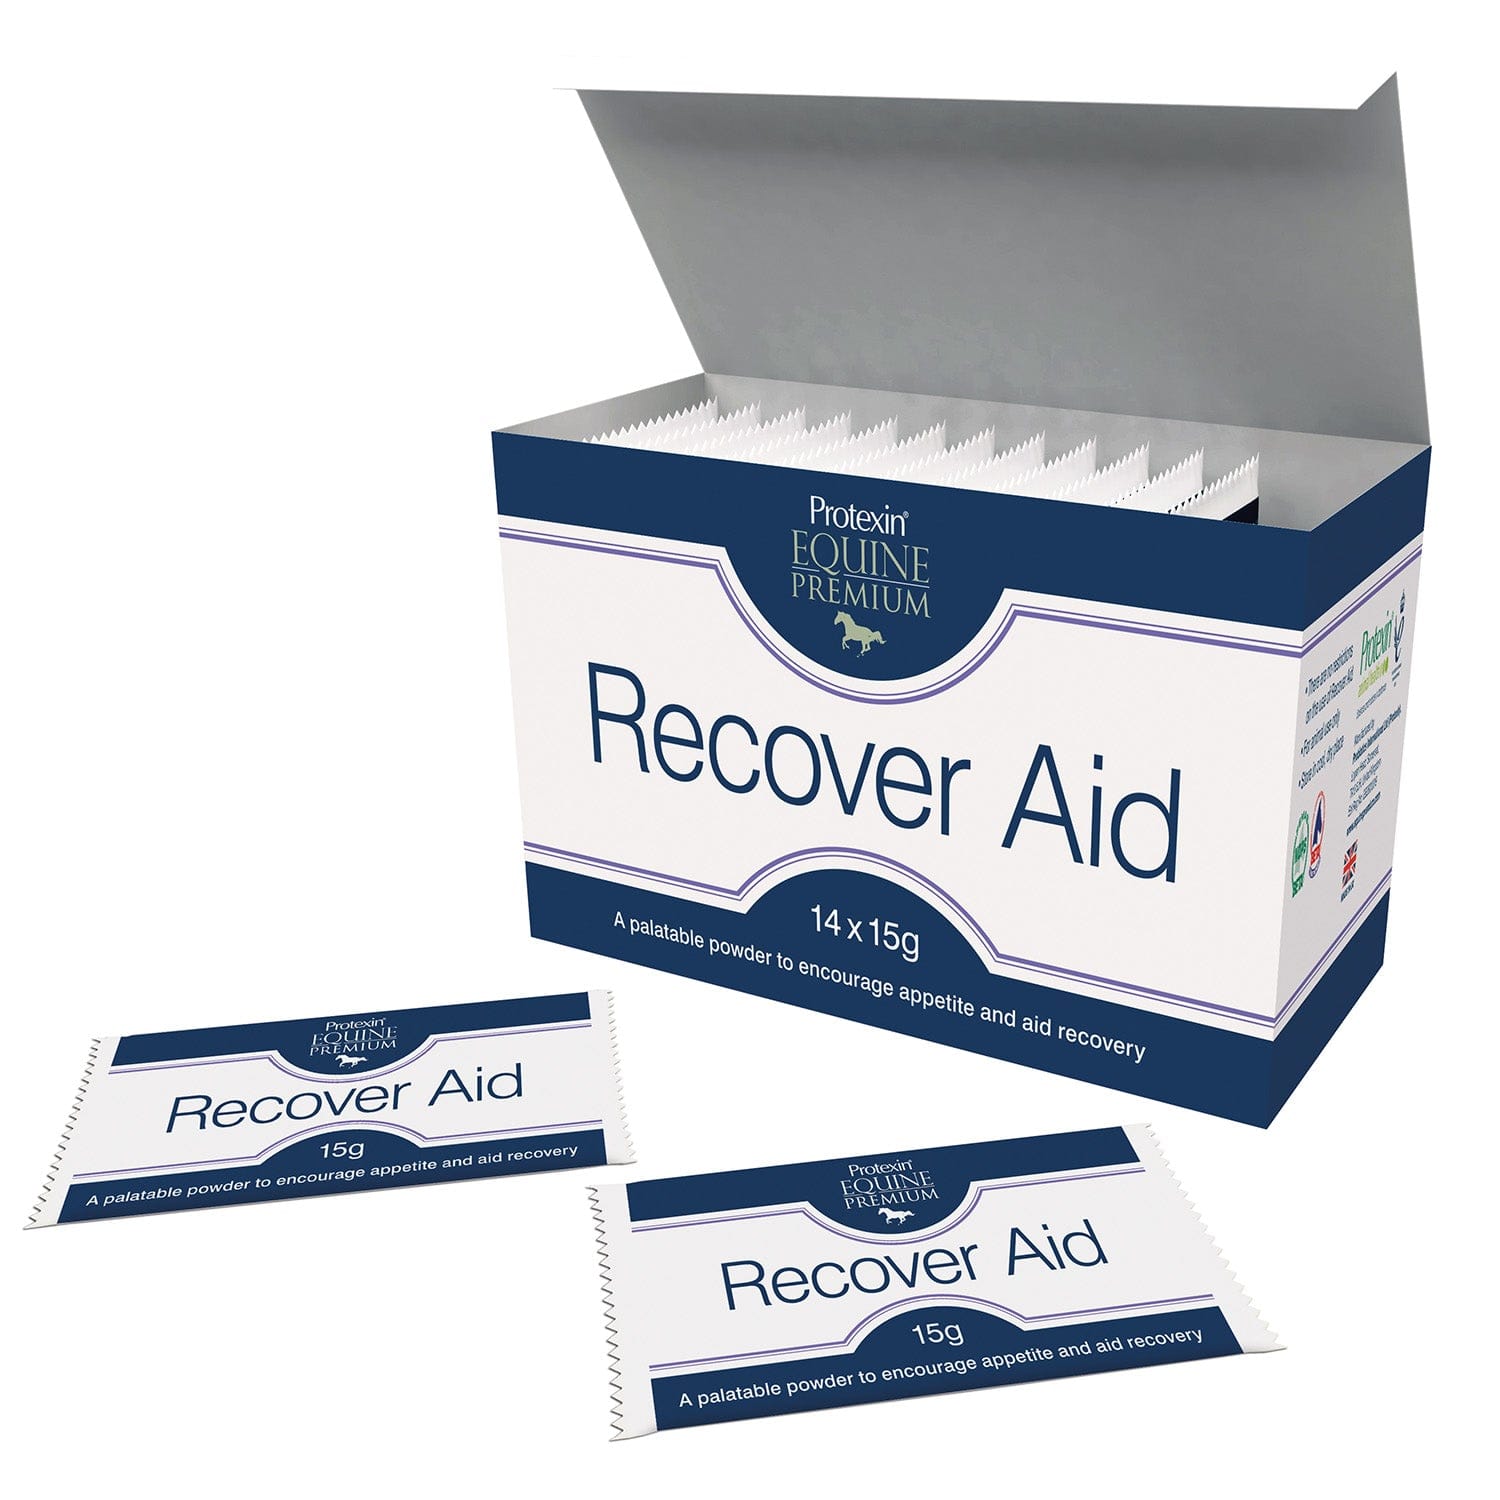 Protexin recover aid